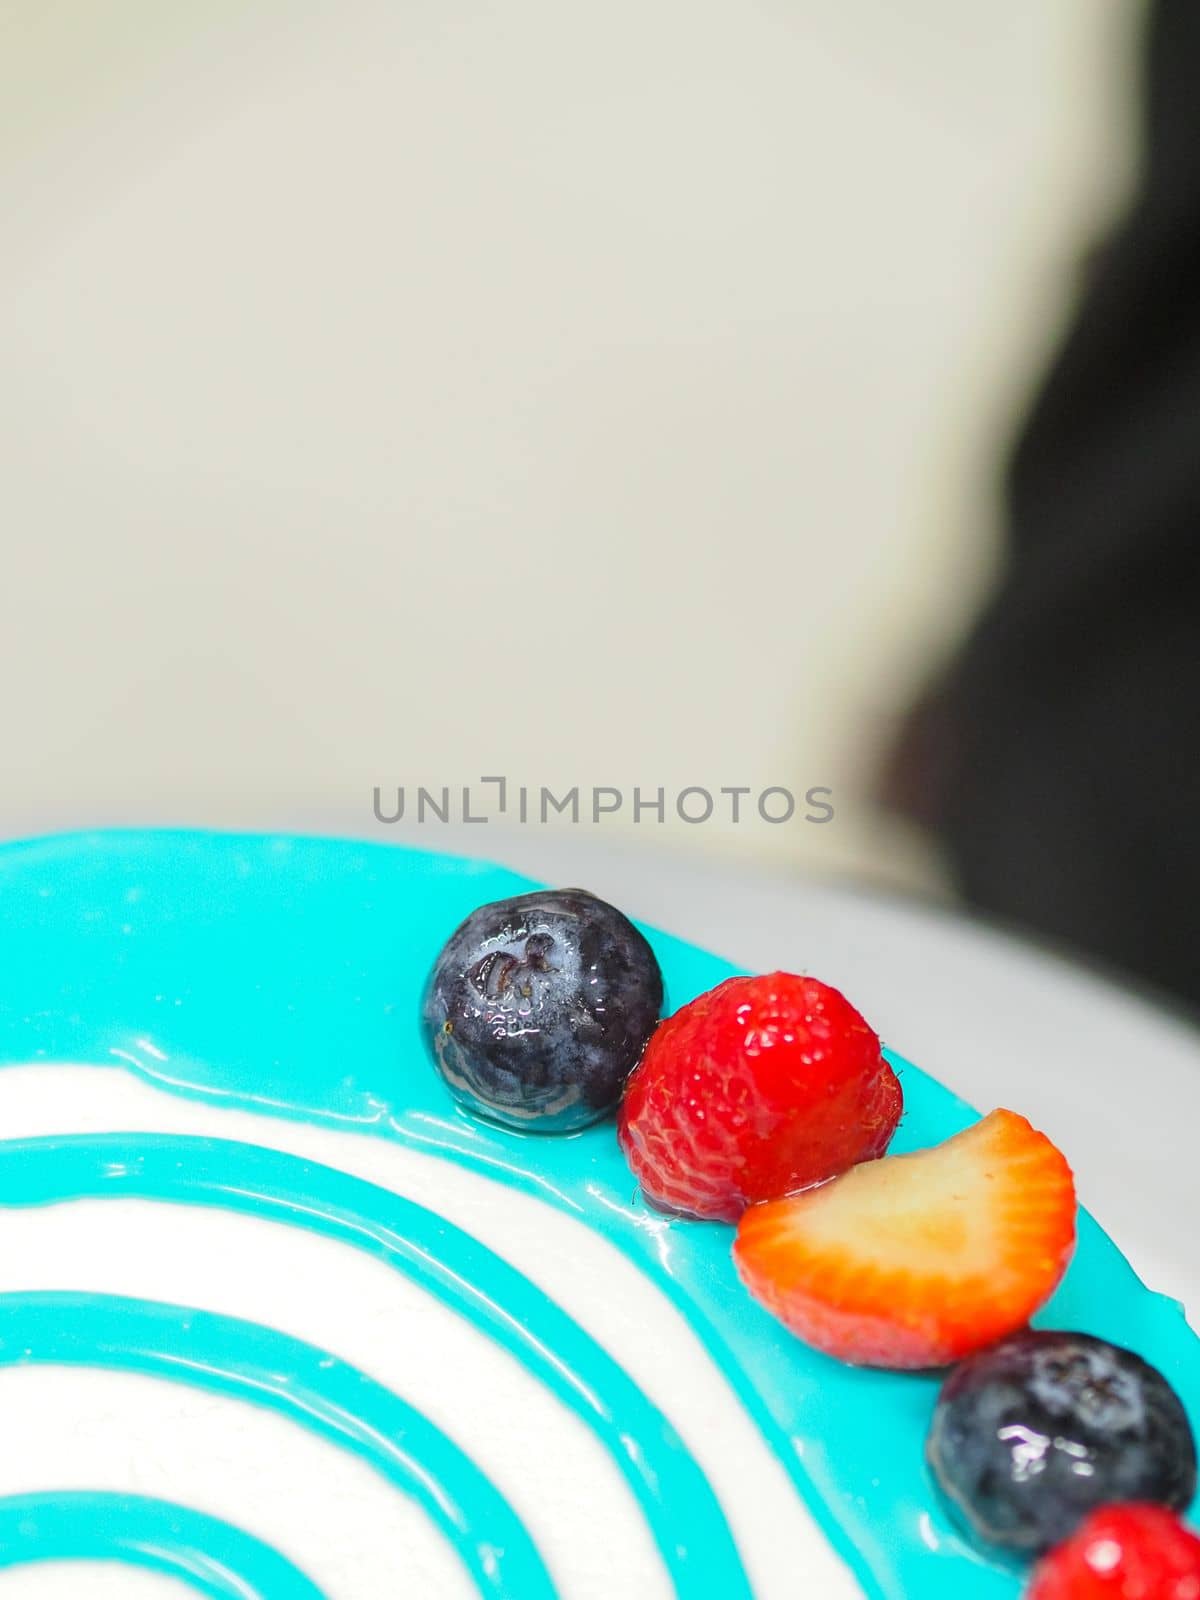 pastry chef cake designer decorating turquoise blue white frosted cheesecake in kitchen with piping bag